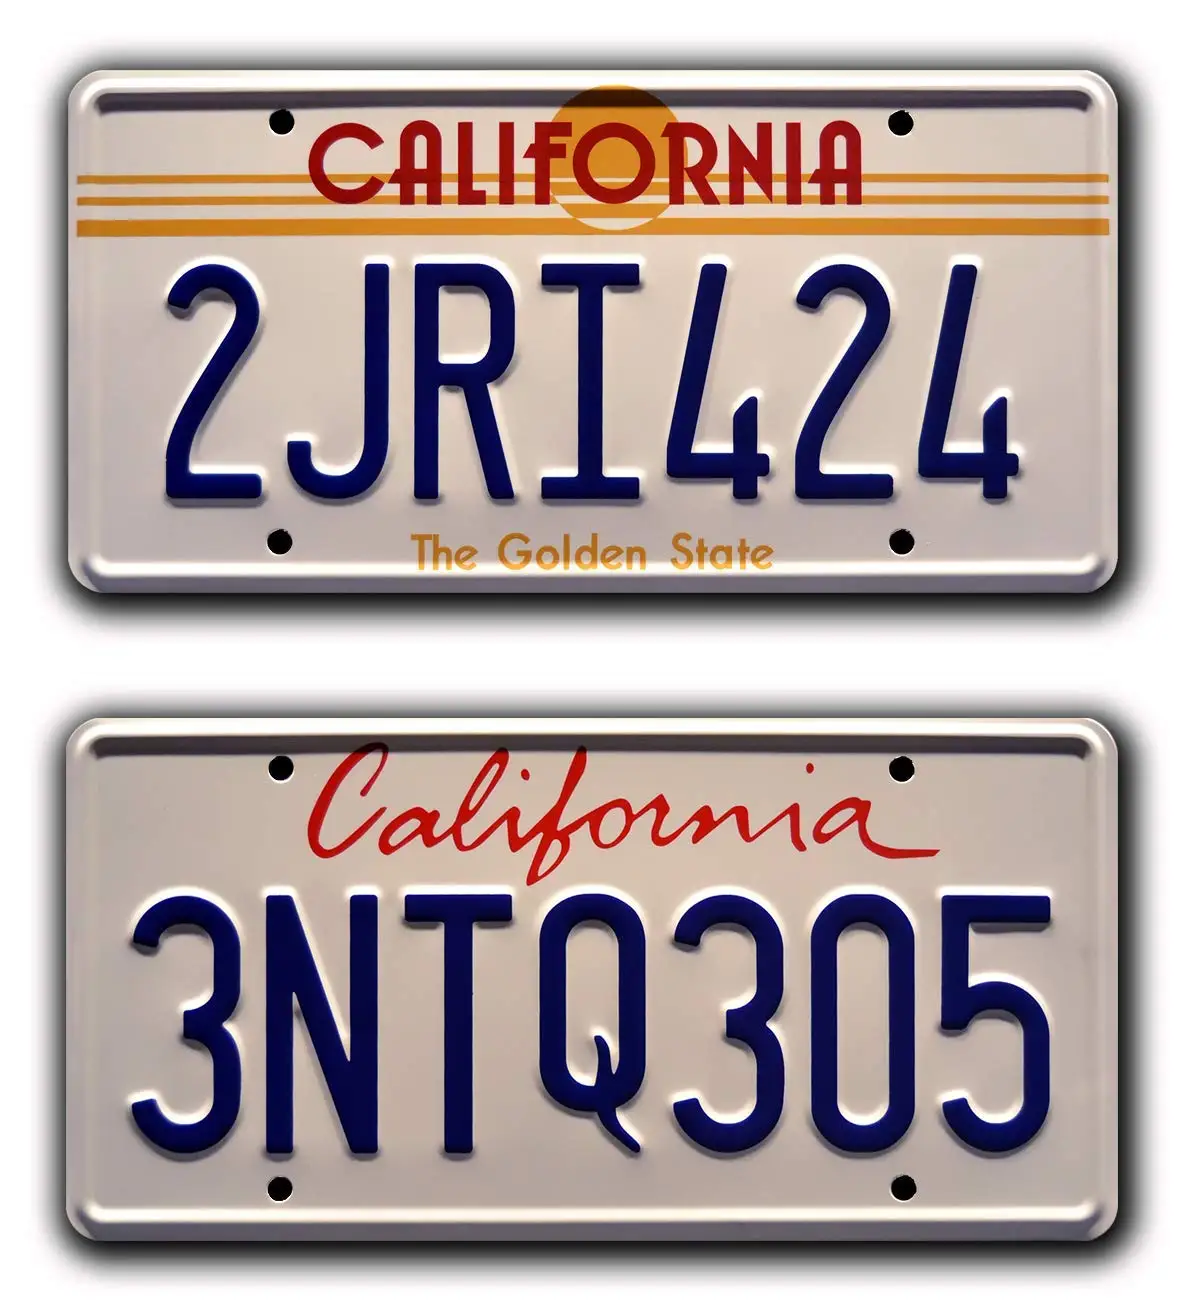 

Fast and Furious | 2JRI424 + 3NTQ305 | Metal Stamped License Plates-License Plate License Plate Frames Car Decor License Plate